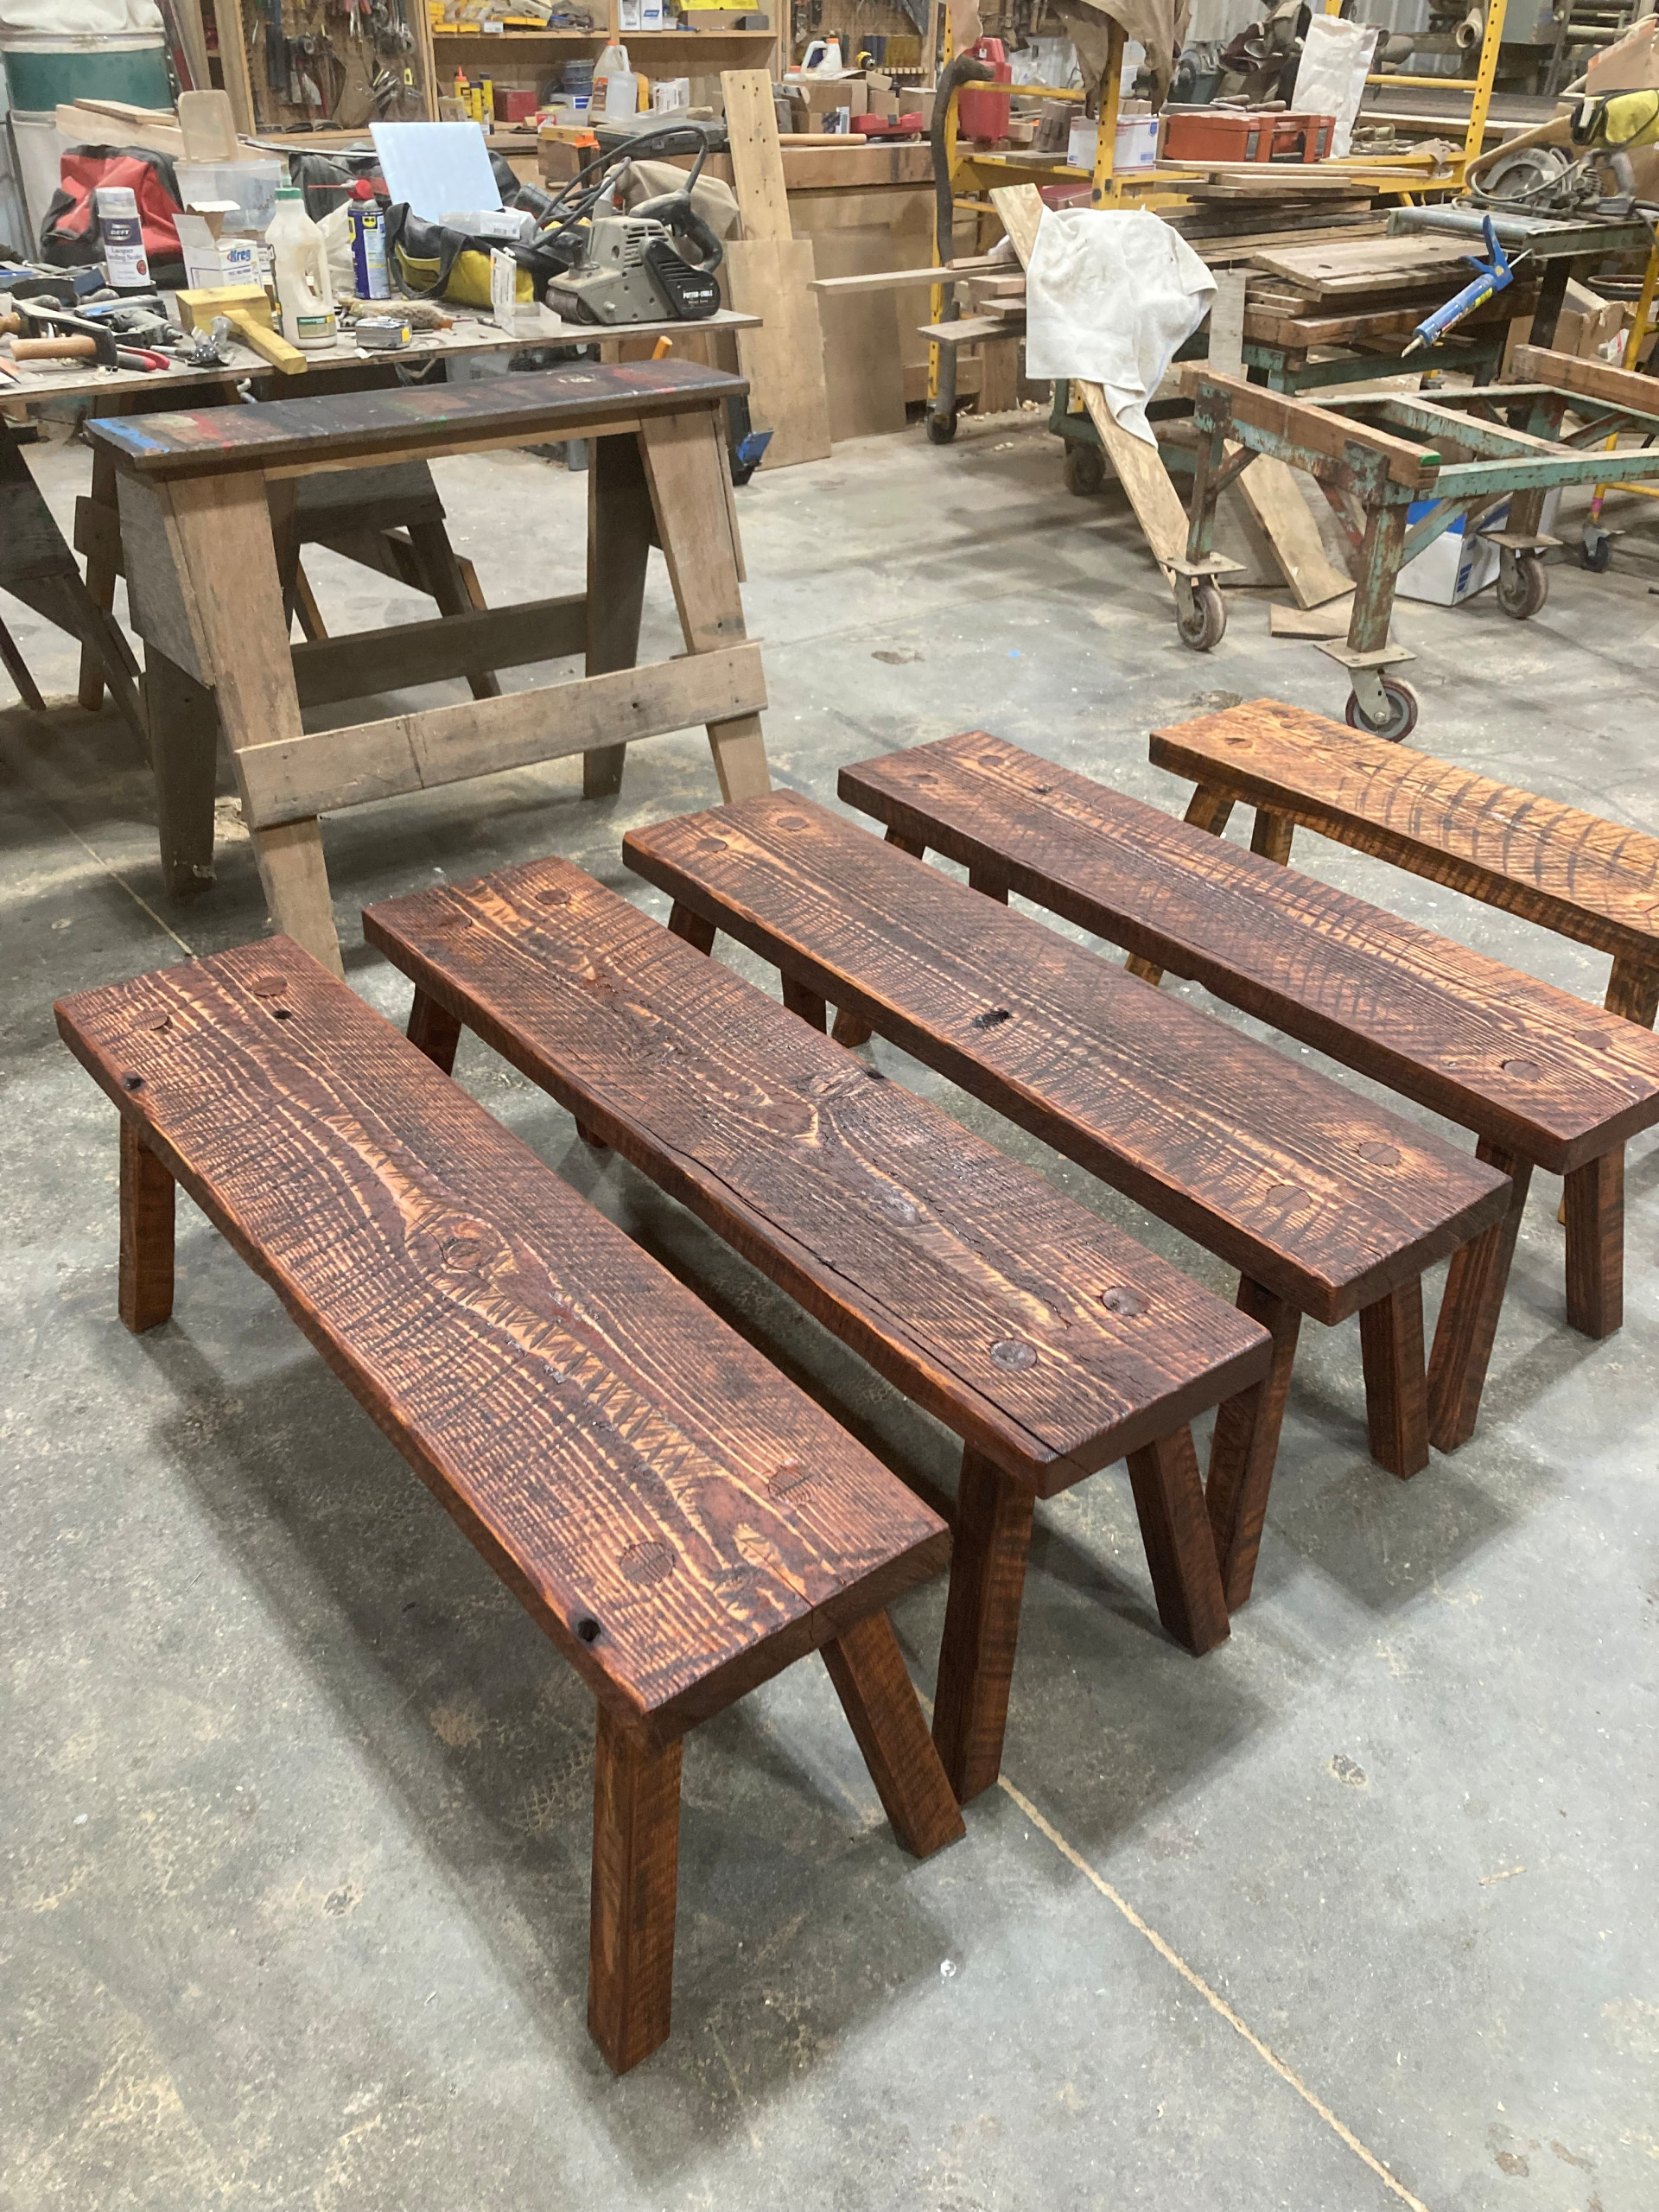 Rustic benches